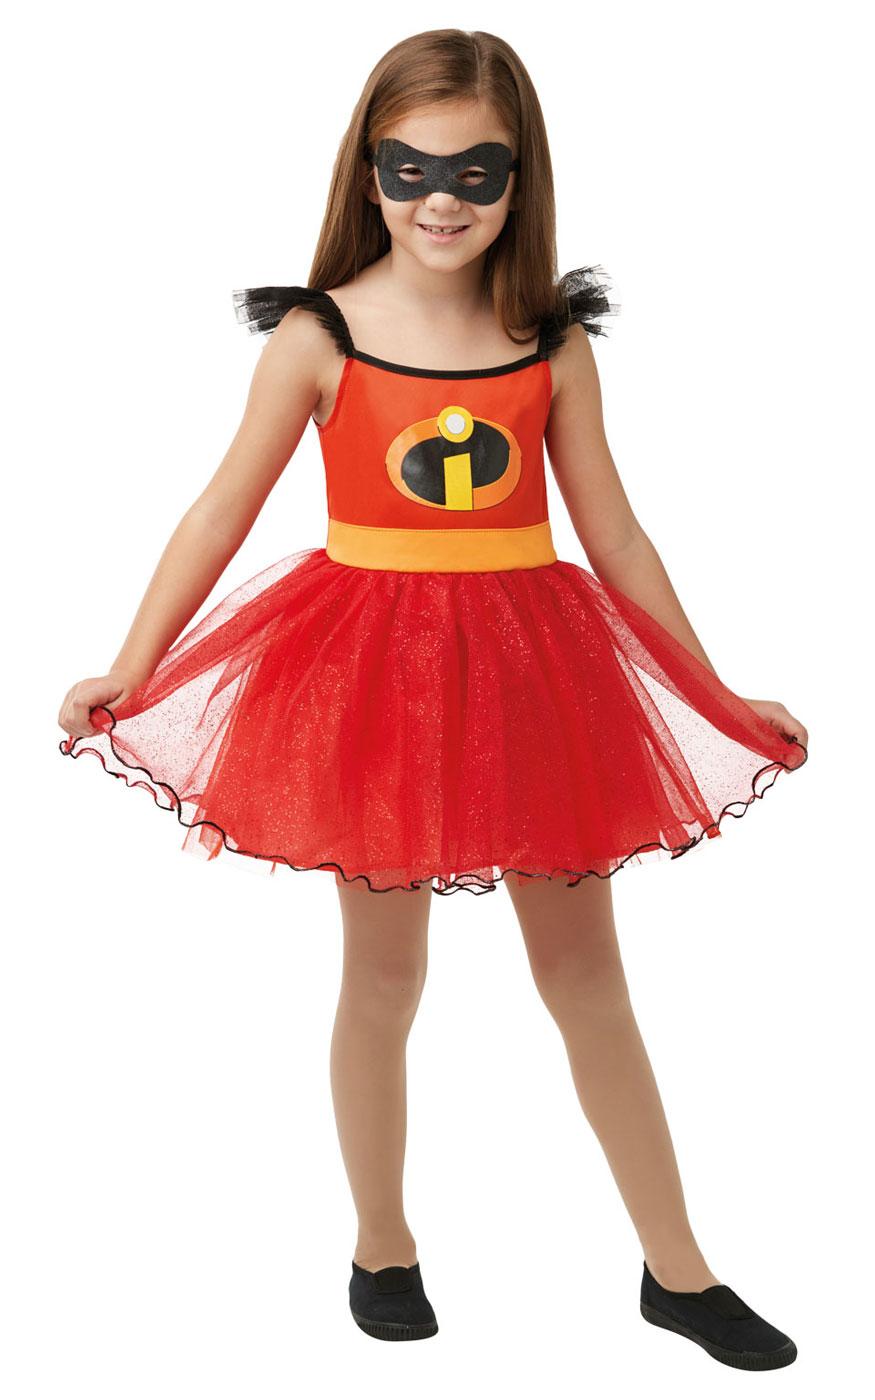 Incredibles 2 Tutu Dress for Girls by Rubies 640876 available here at Karnival Costumes online party shop